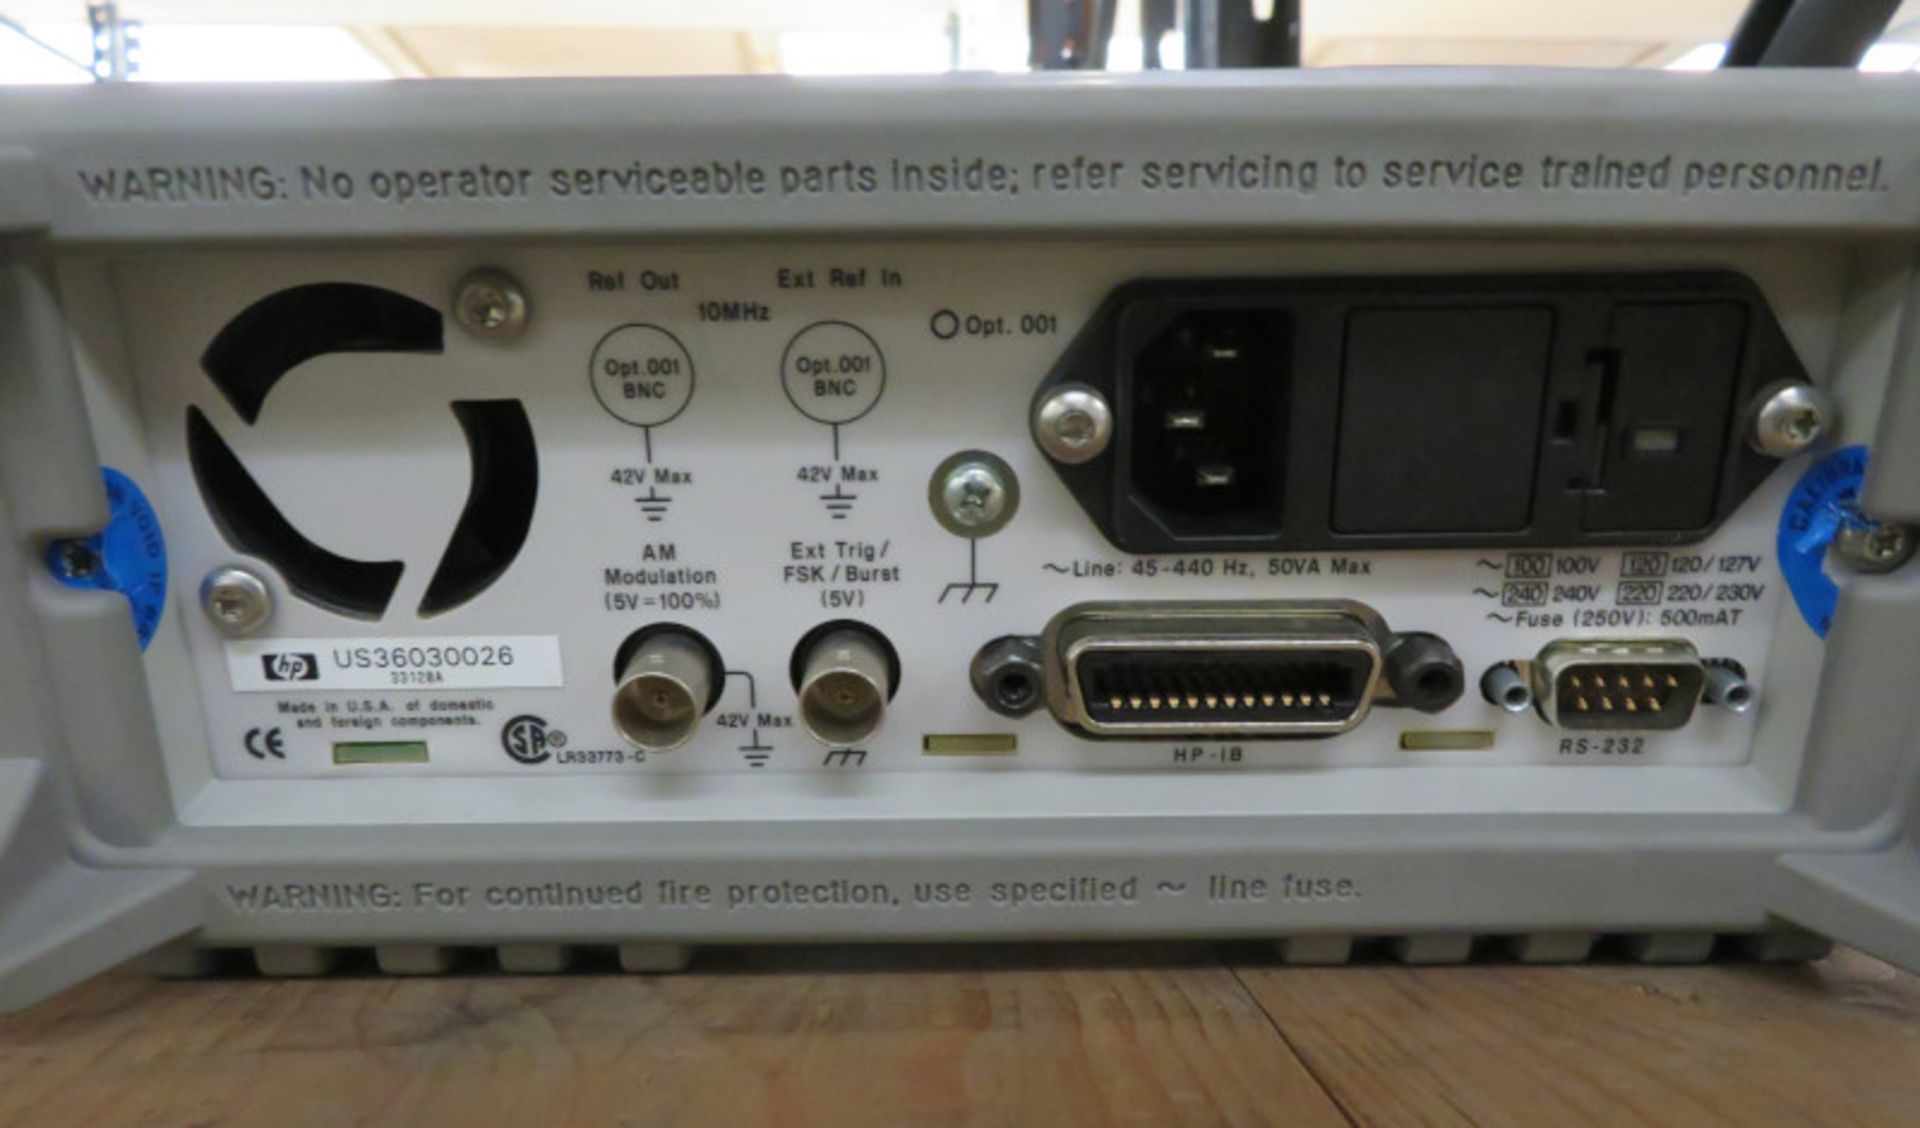 HP 33120A 15MHz Function/Arbitrary Waveform Generator - No Power Cable & Manual - Image 3 of 4